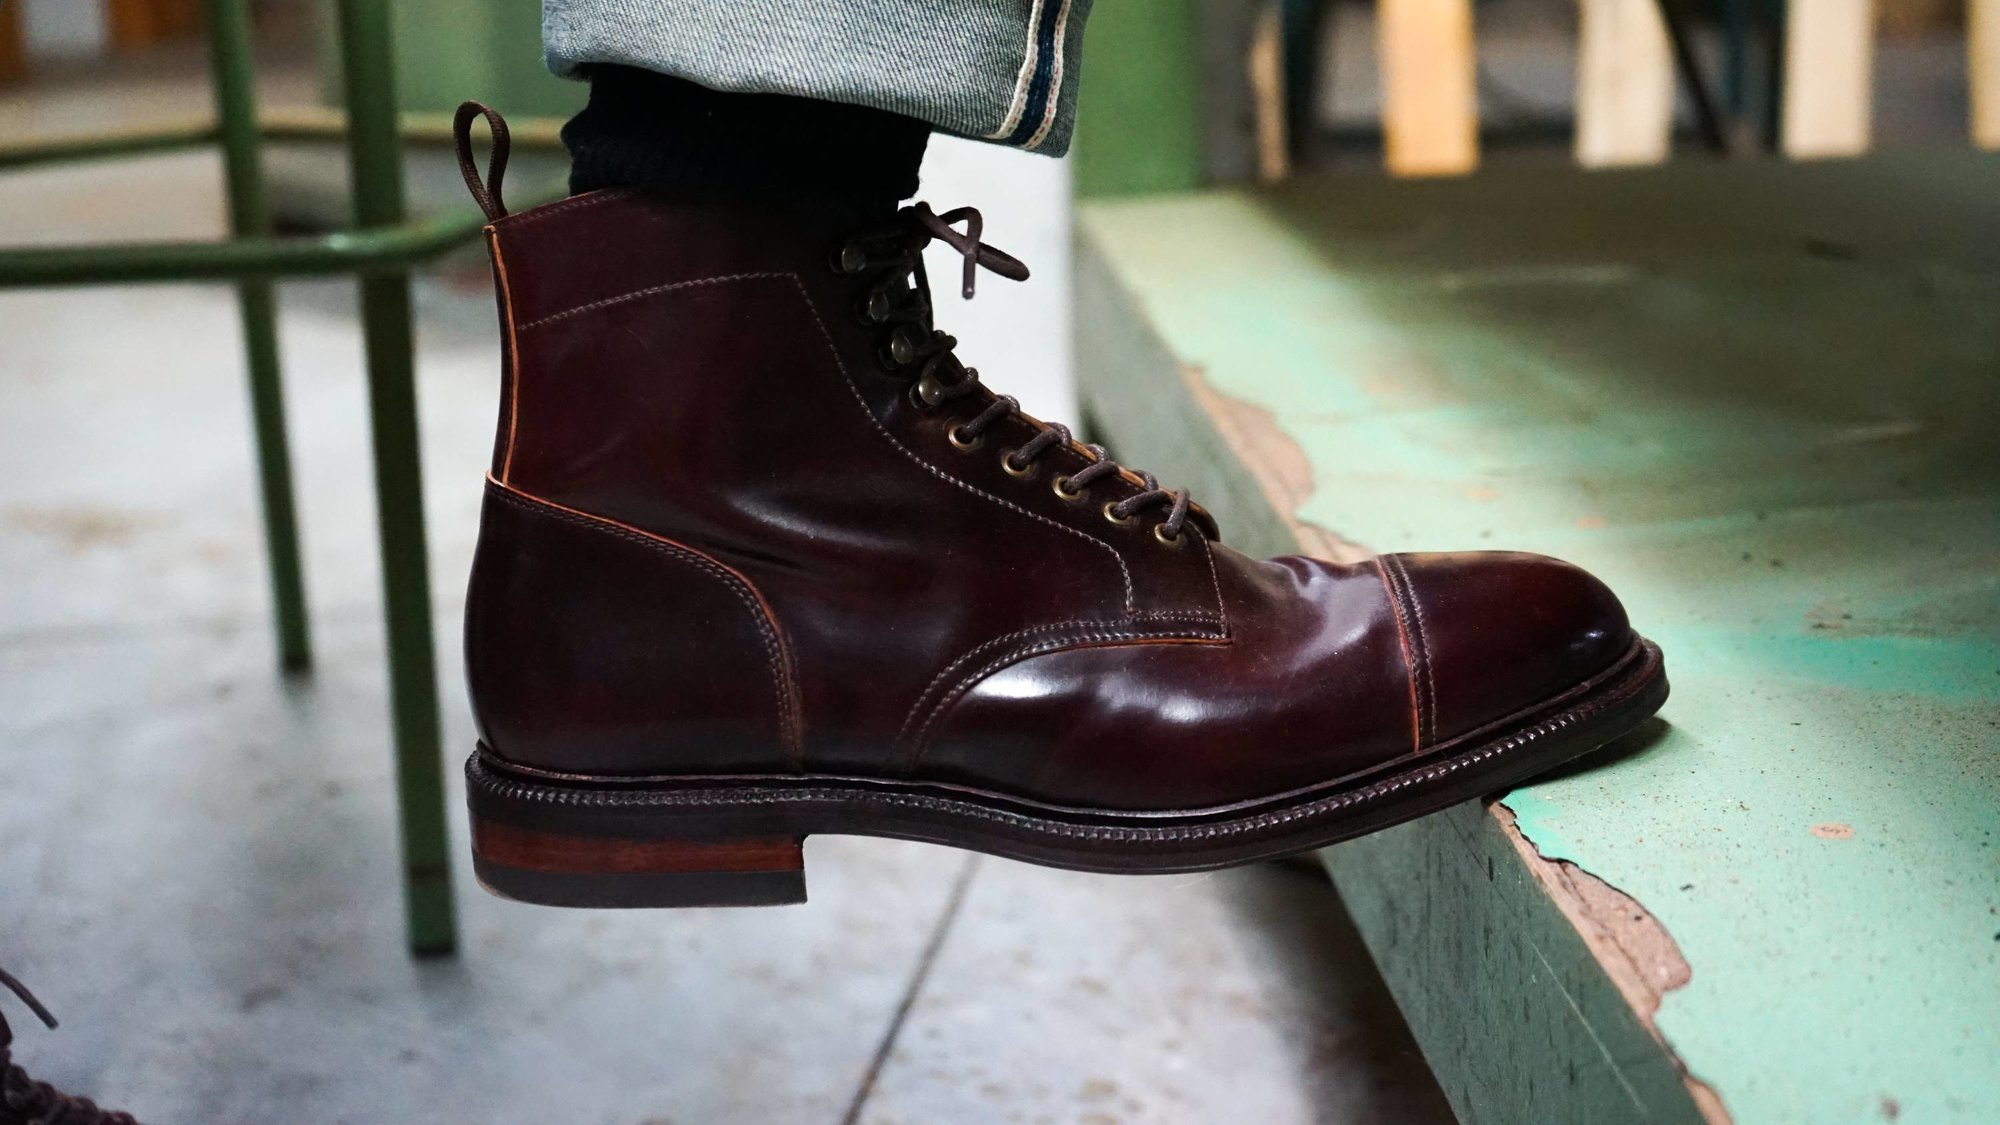 Horween Shell Cordovan Boots